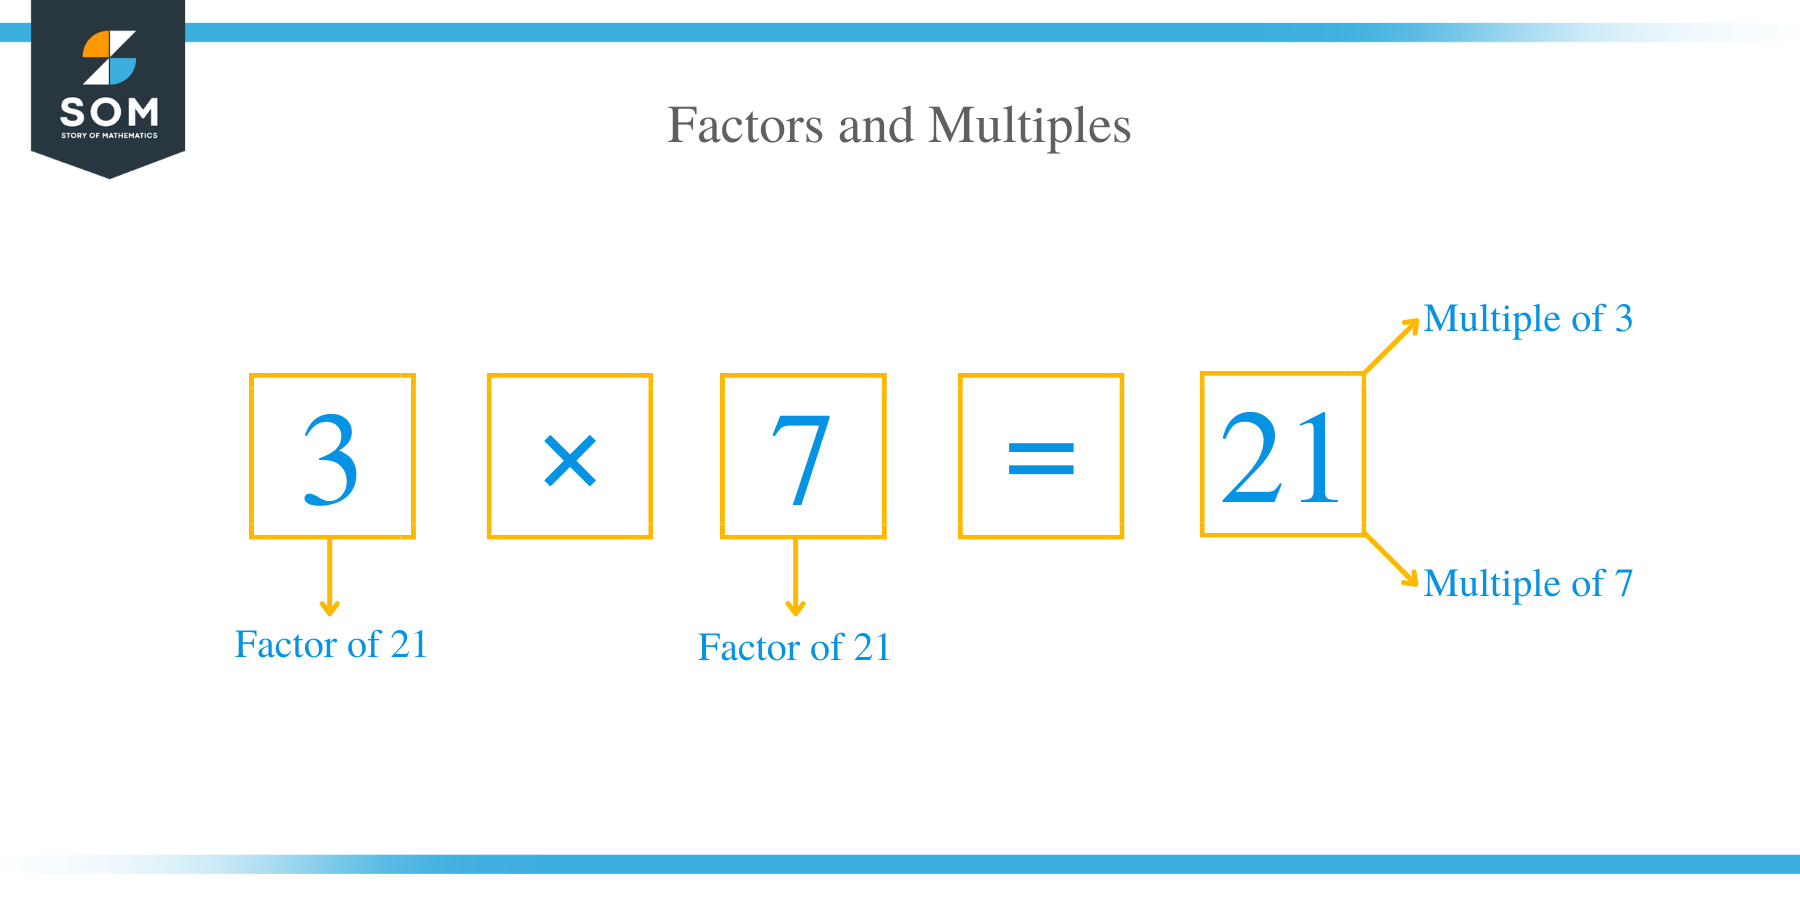 What is a Factor and Multiple